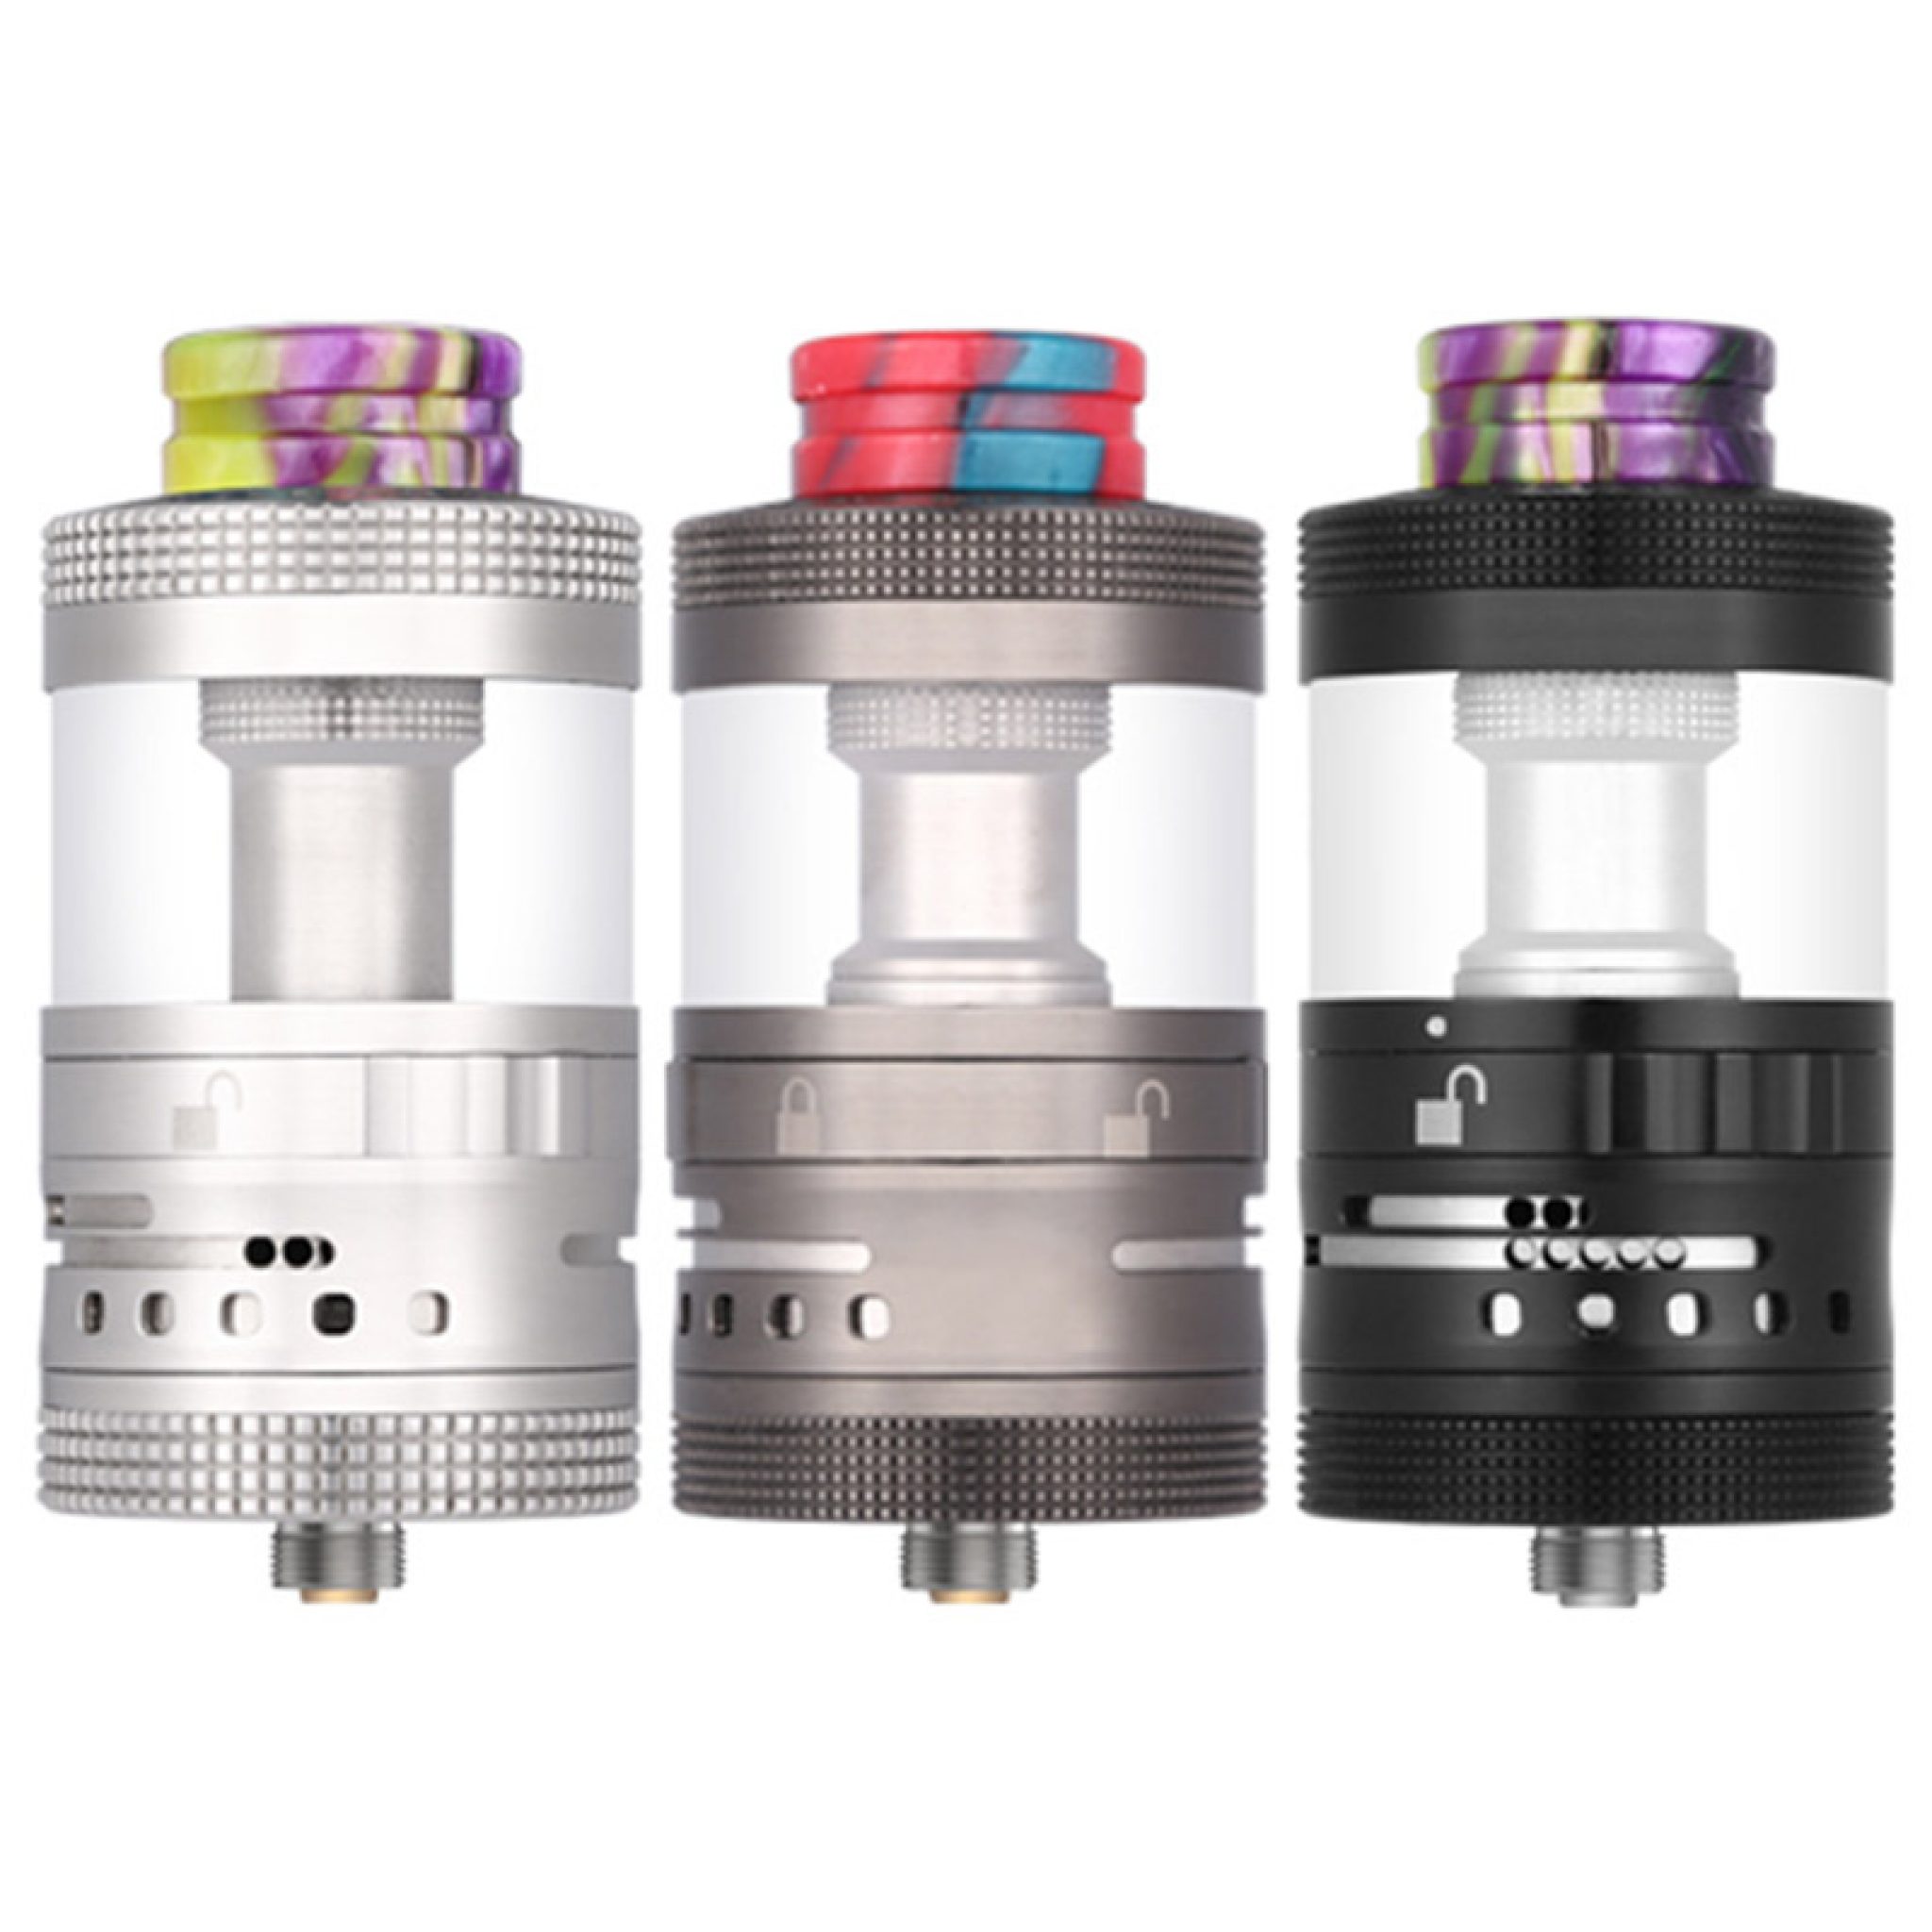 Aromamizer plus rdta by steam crave фото 3